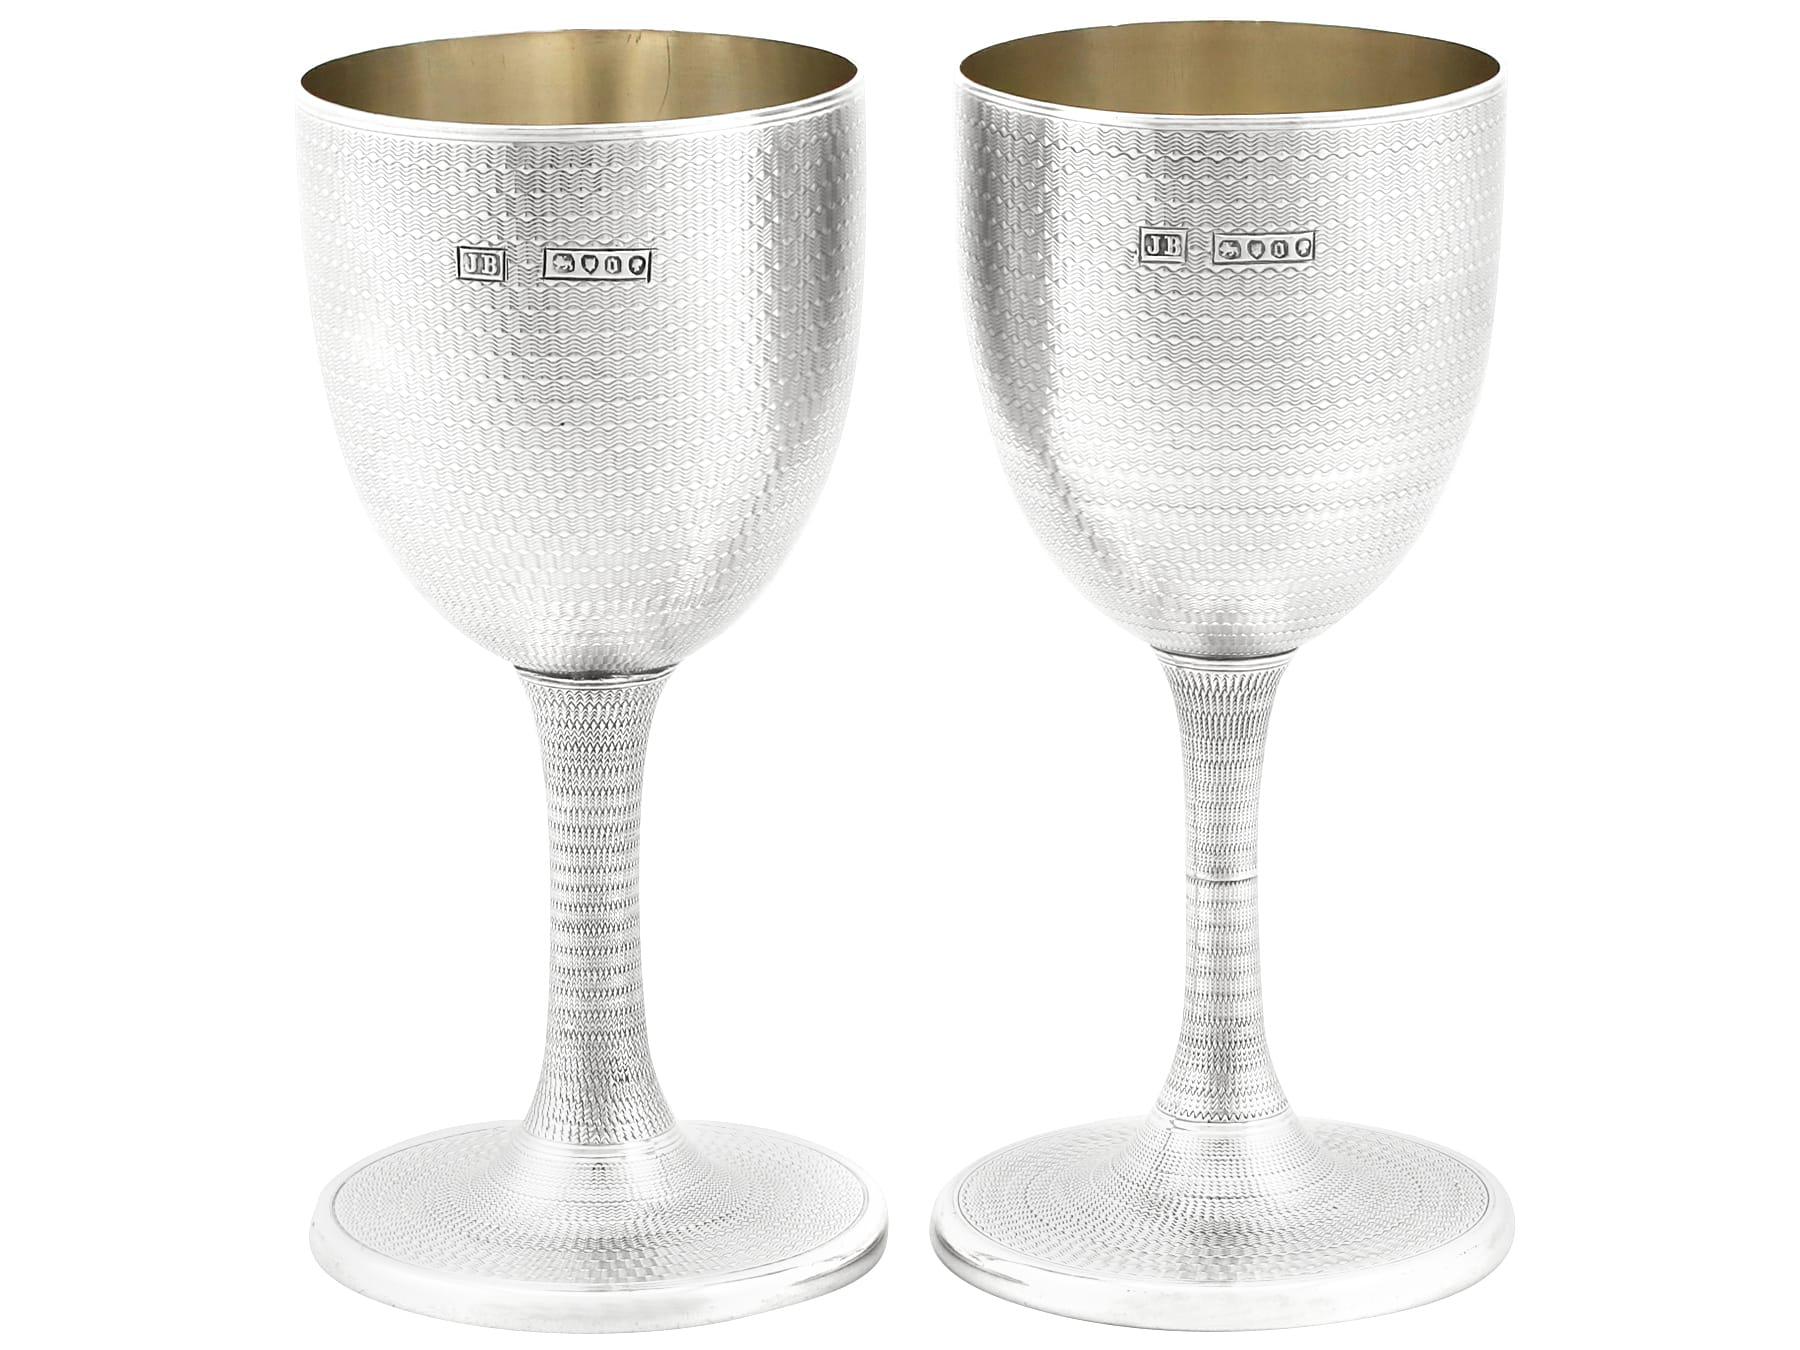 An exceptional, fine and impressive pair of antique Victorian English sterling silver wine goblets; an addition to our range of wine and drink related silverware.

These exceptional antique Victorian sterling silver wine goblets have a plain